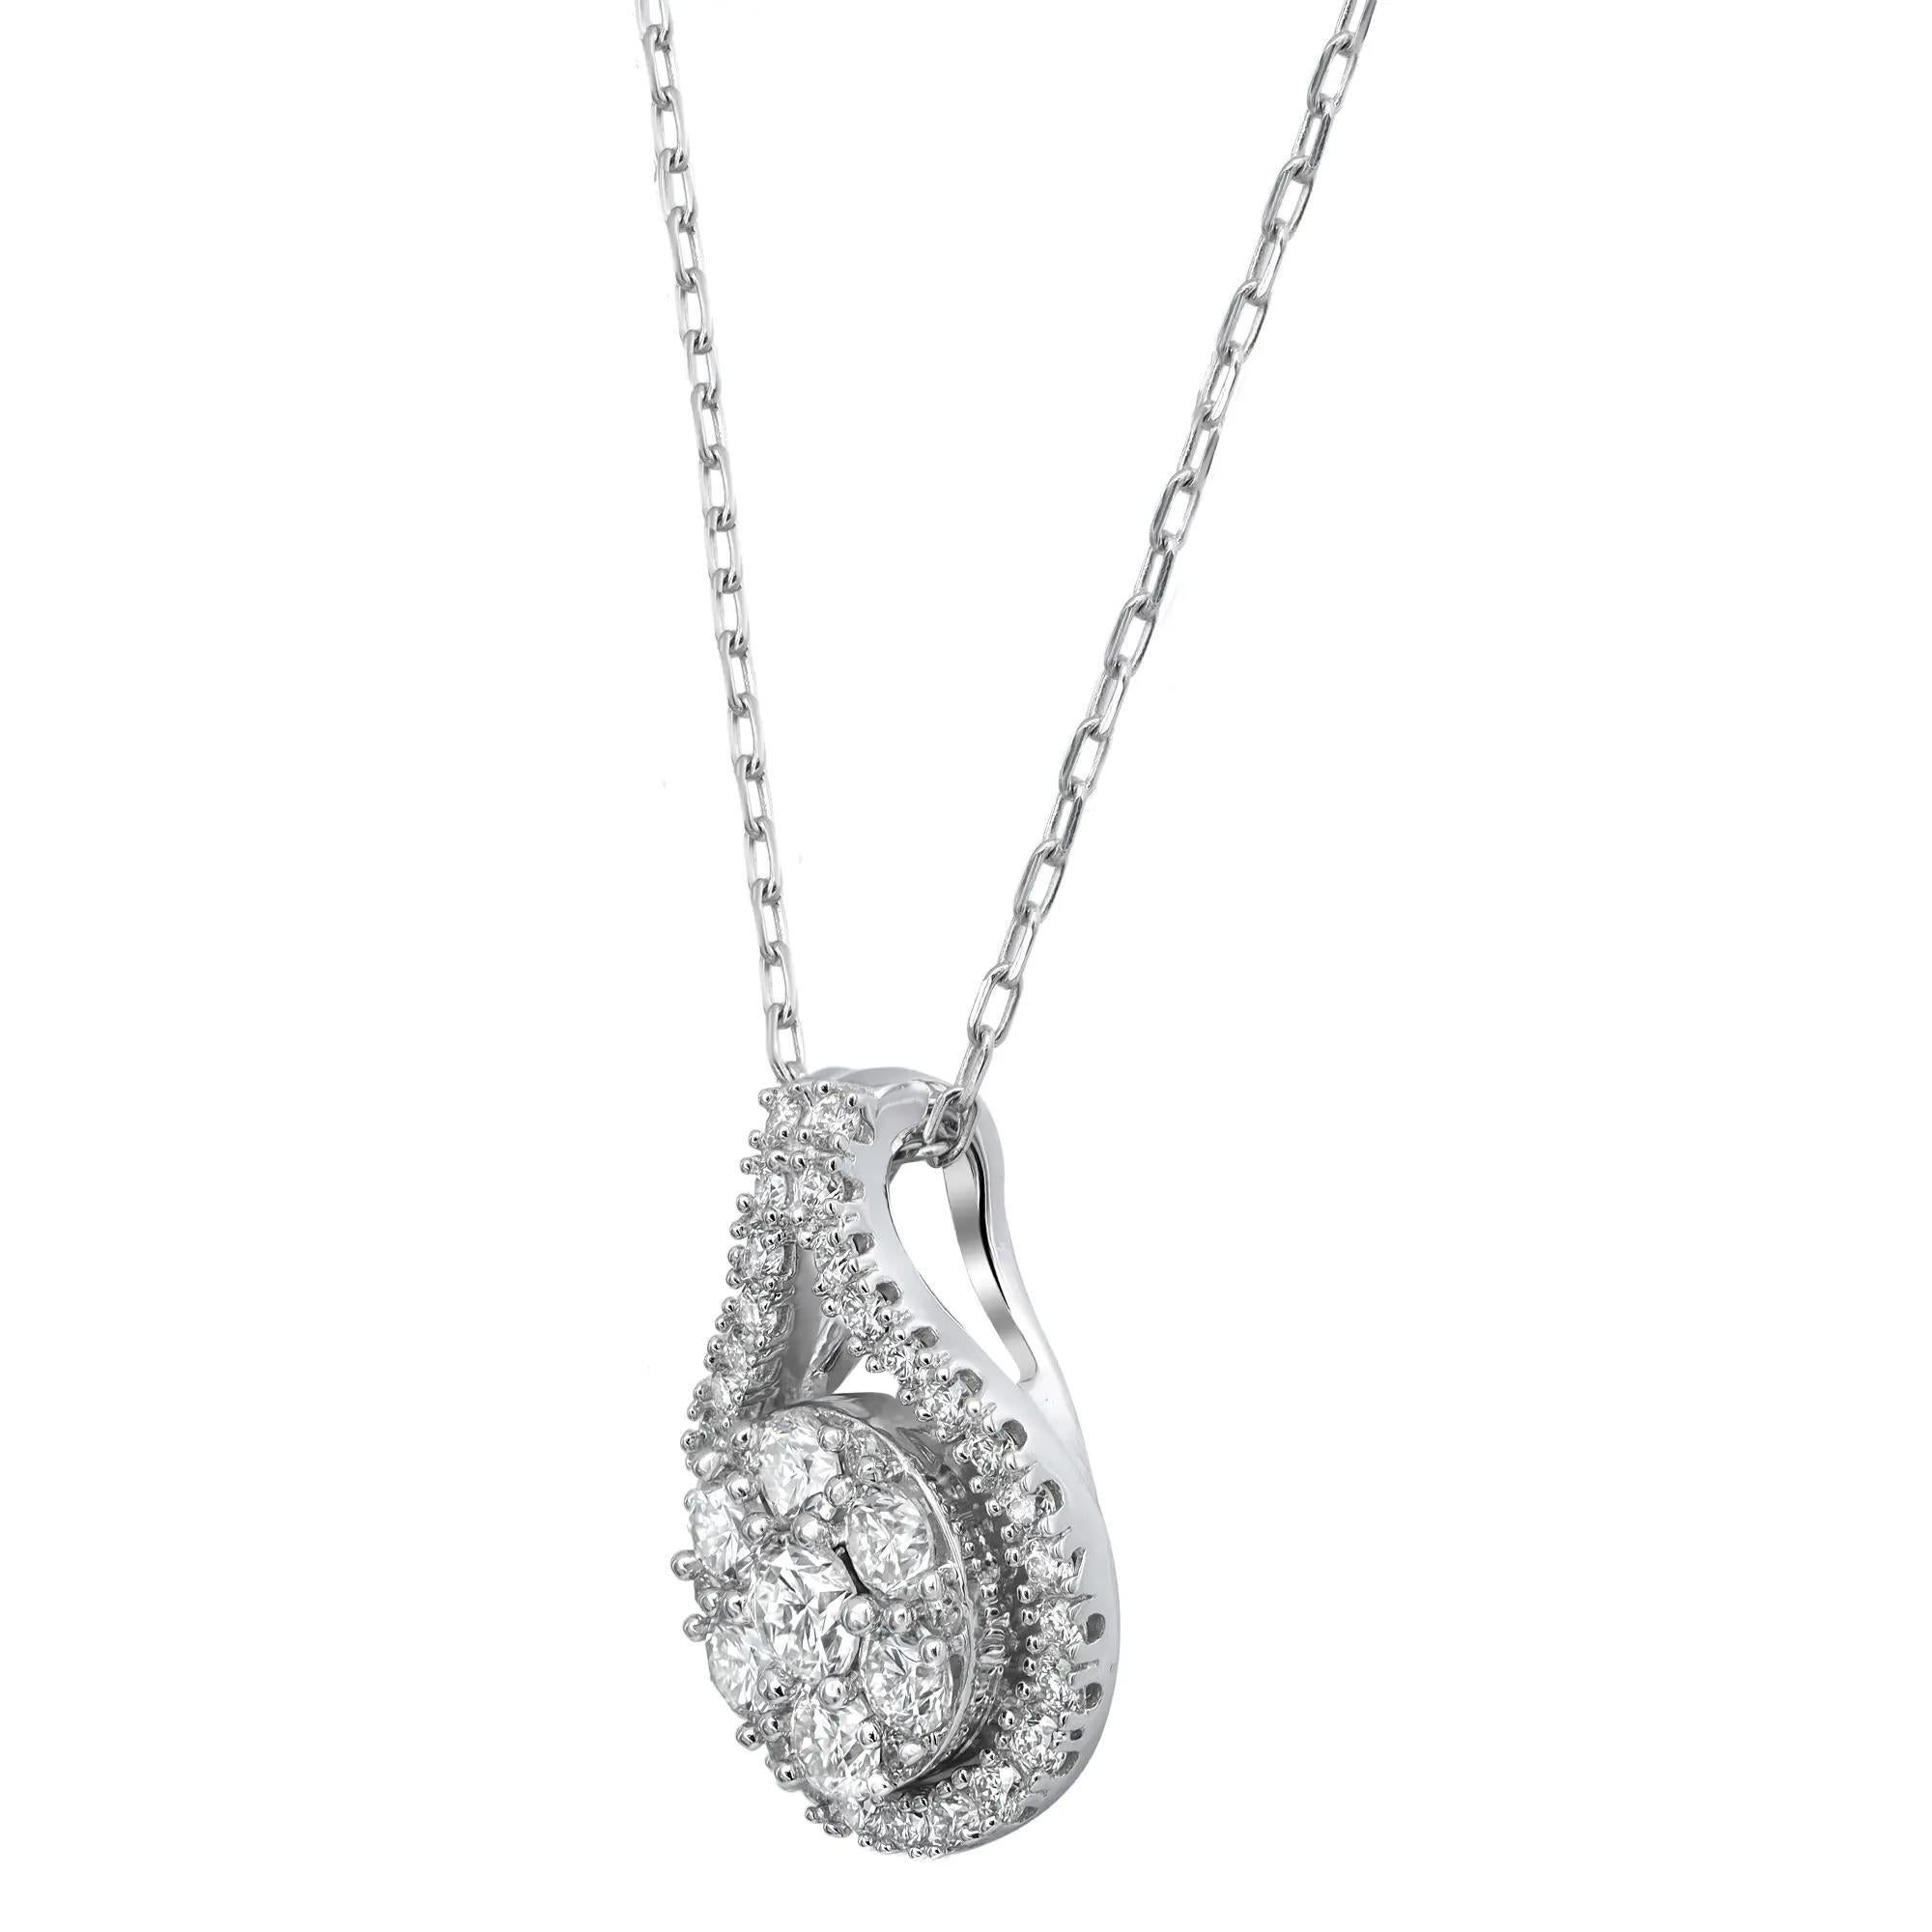 This ladies stunning diamond pendant adds sheer beauty and brilliance with striking round cut diamonds that are encircled excellently by a fine series of small shimmering round shaped stones aligned in a classic prong setting. Total diamond carat